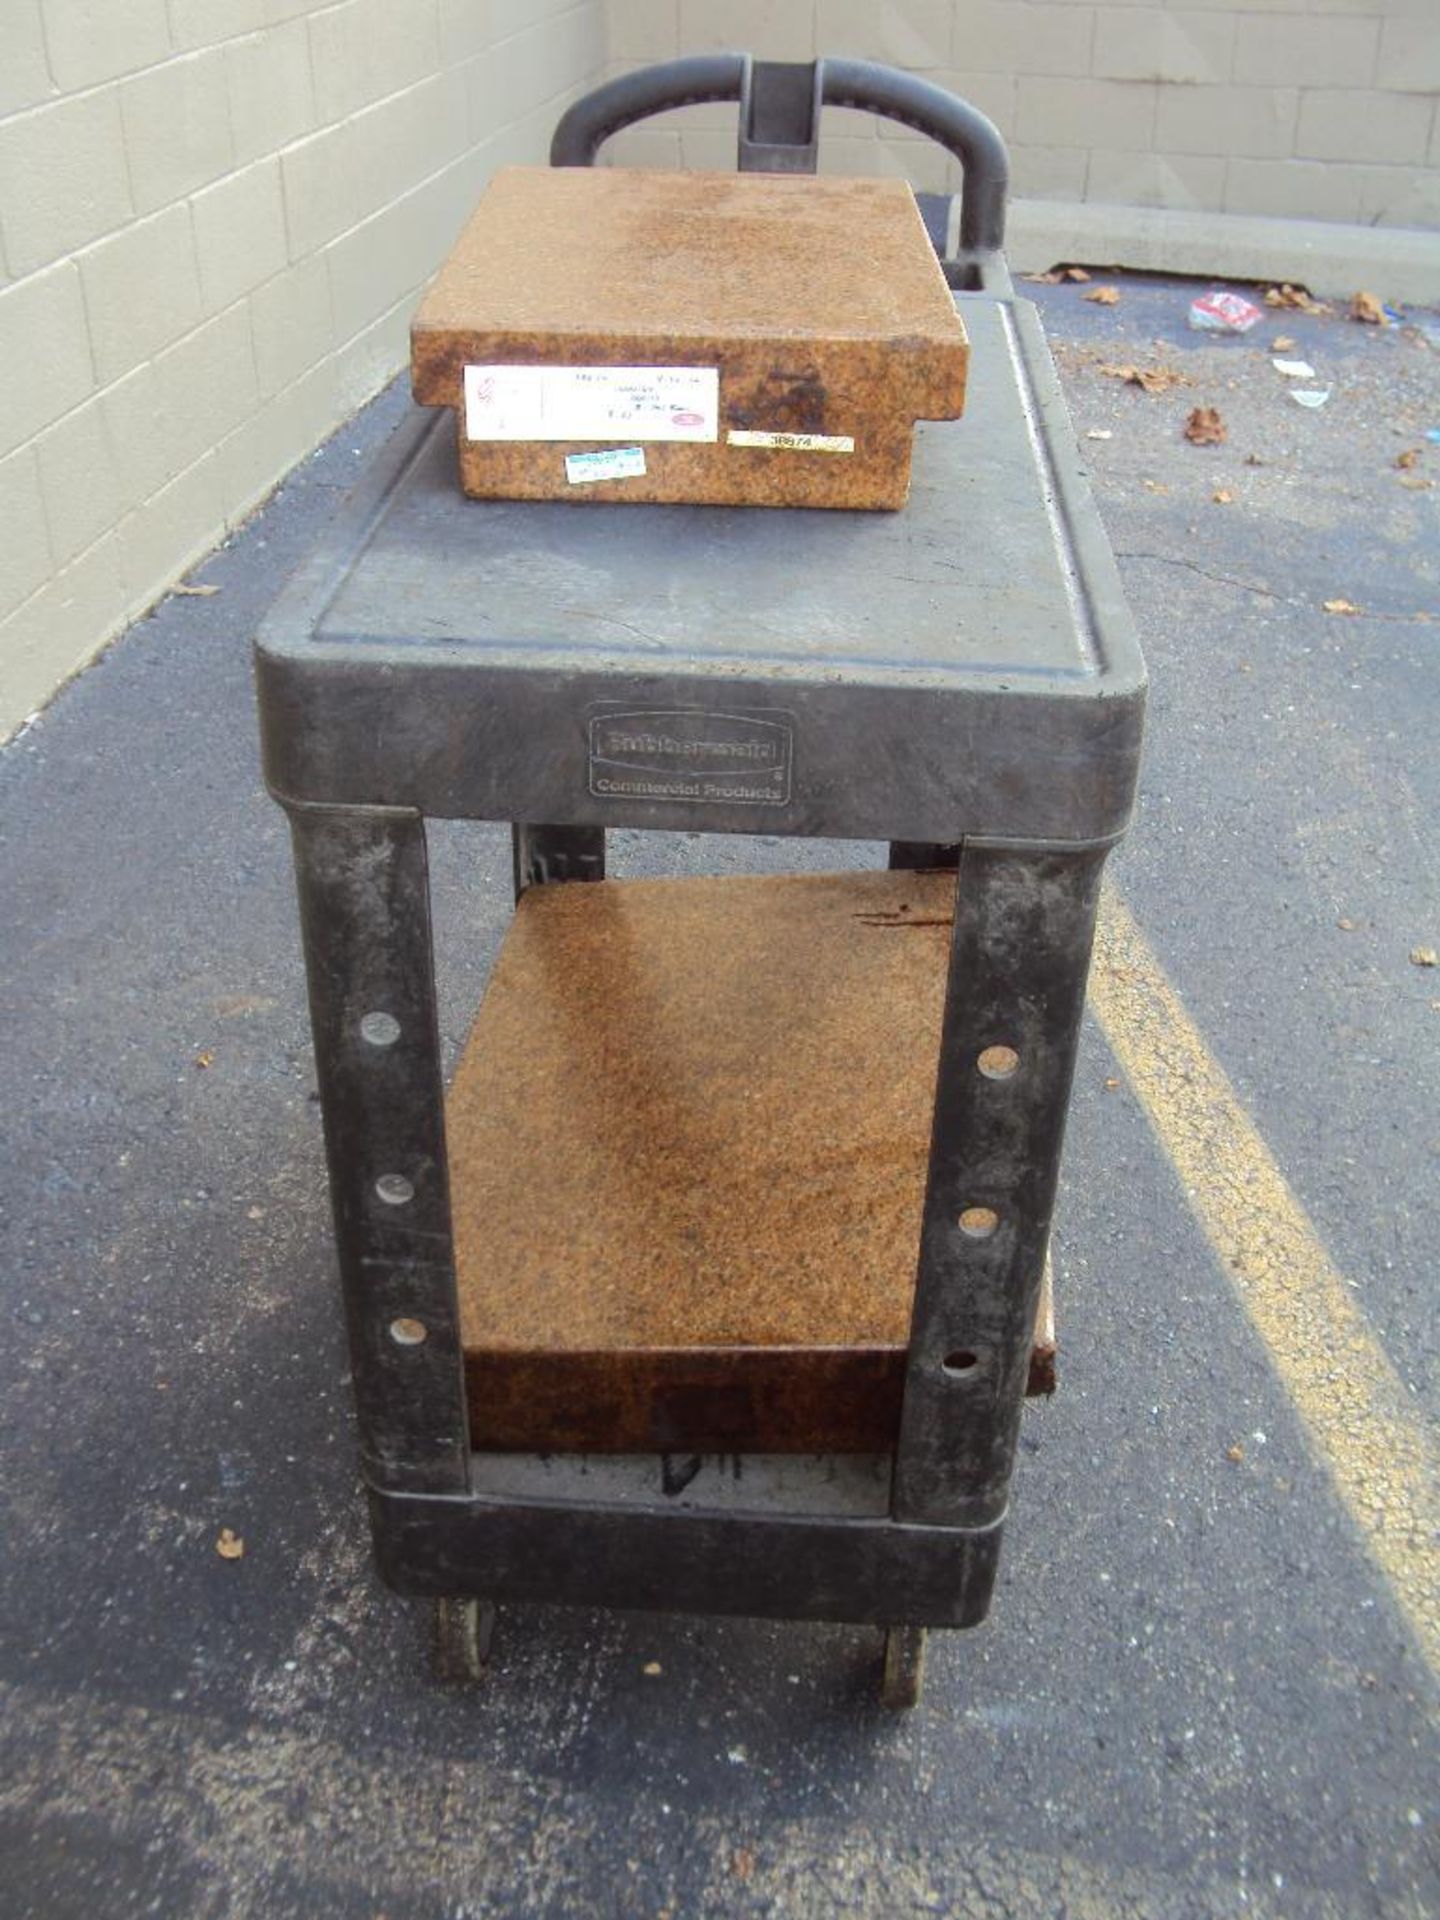 (2) Pink Granite Surface Plates w/ Rubbermaid Shop Cart - Image 5 of 6